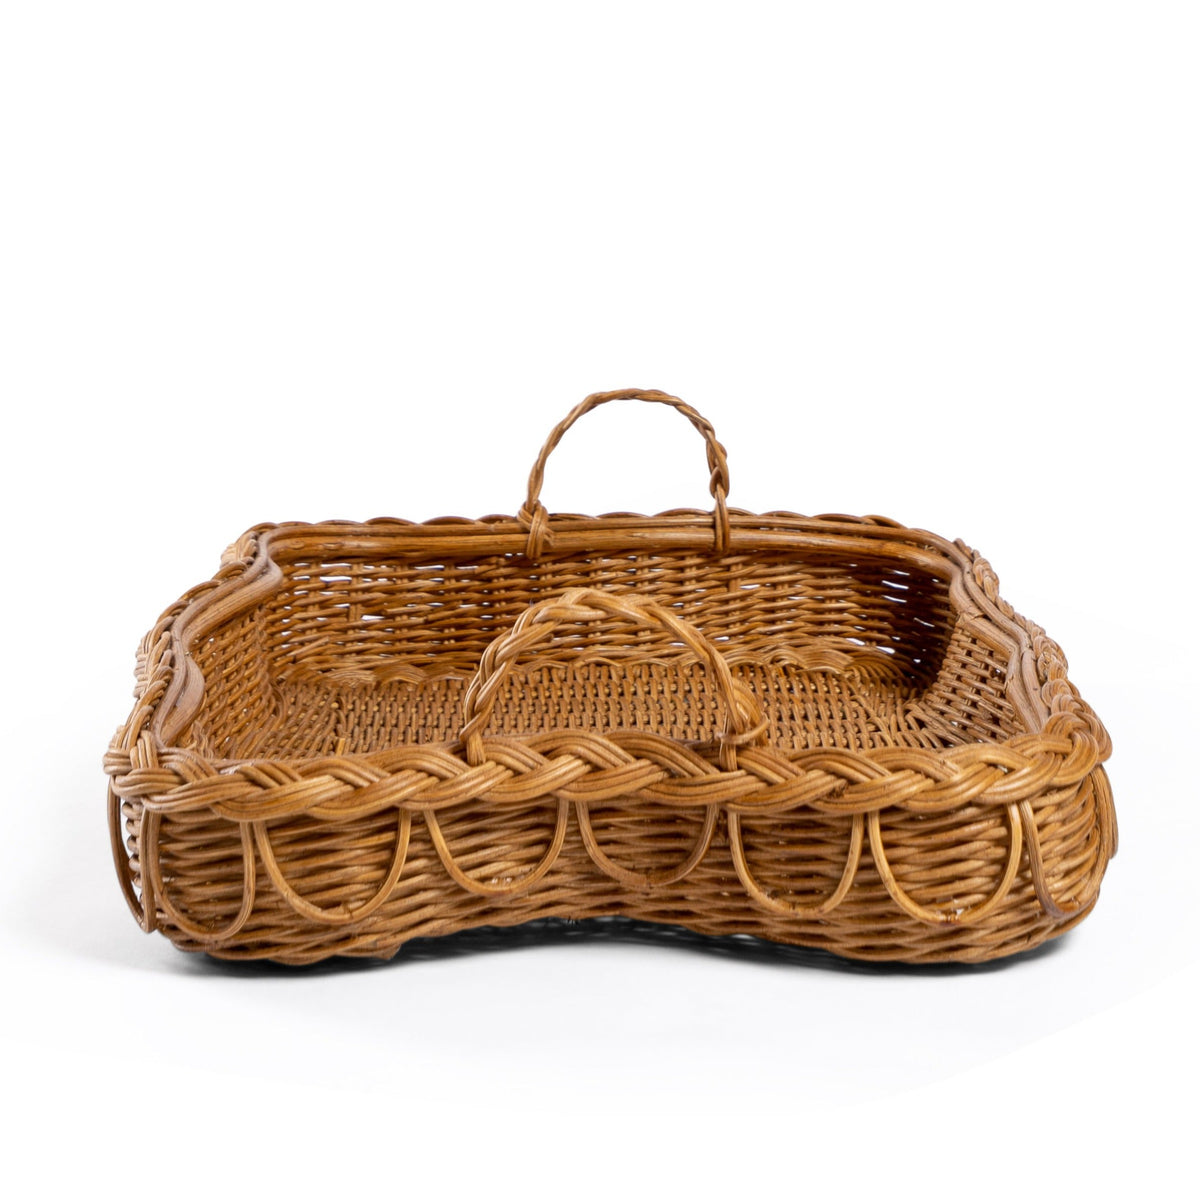 Back side Photo of Sharland-England's Hadley tray Hand-crafted from 100% natural rattan, featuring fixed handles and a beautifully braided, scalloped edge